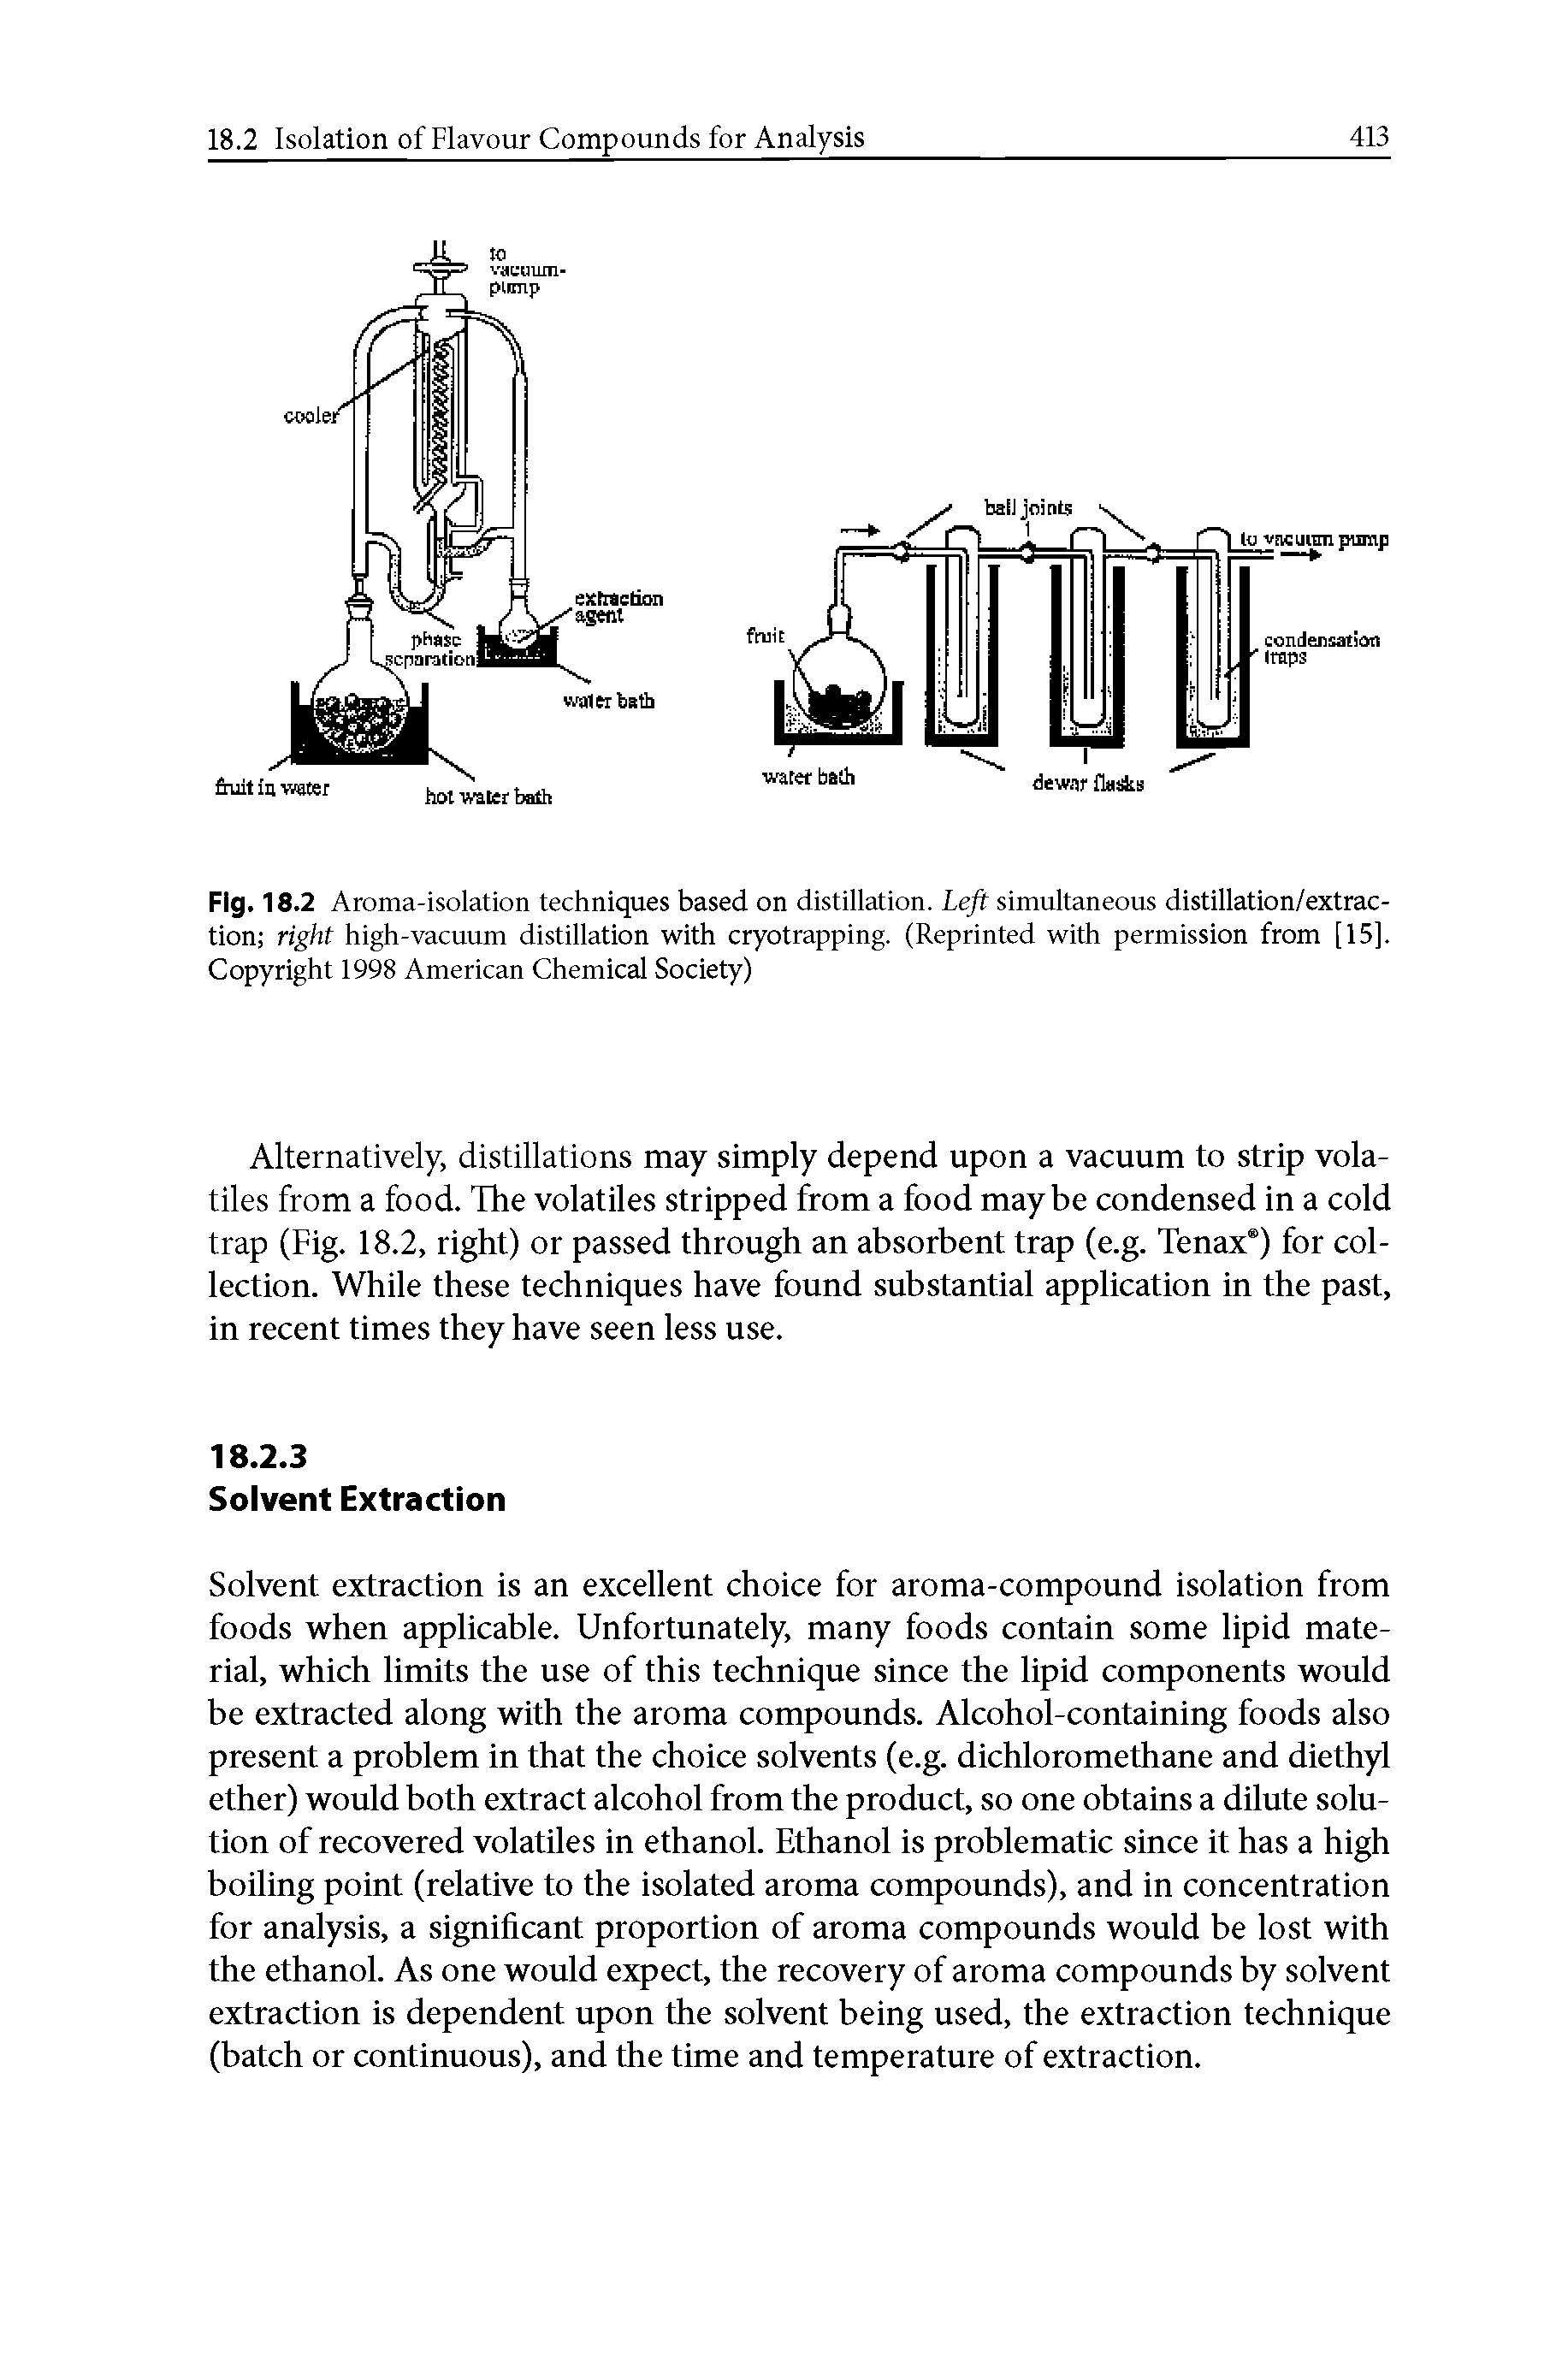 Fig. 18.2 Aroma-isolation techniques based on distillation. Left simultaneous distillation/extrac-tion right high-vacuum distillation with cryotrapping. (Reprinted with permission from [15]. Copyright 1998 American Chemical Society)...